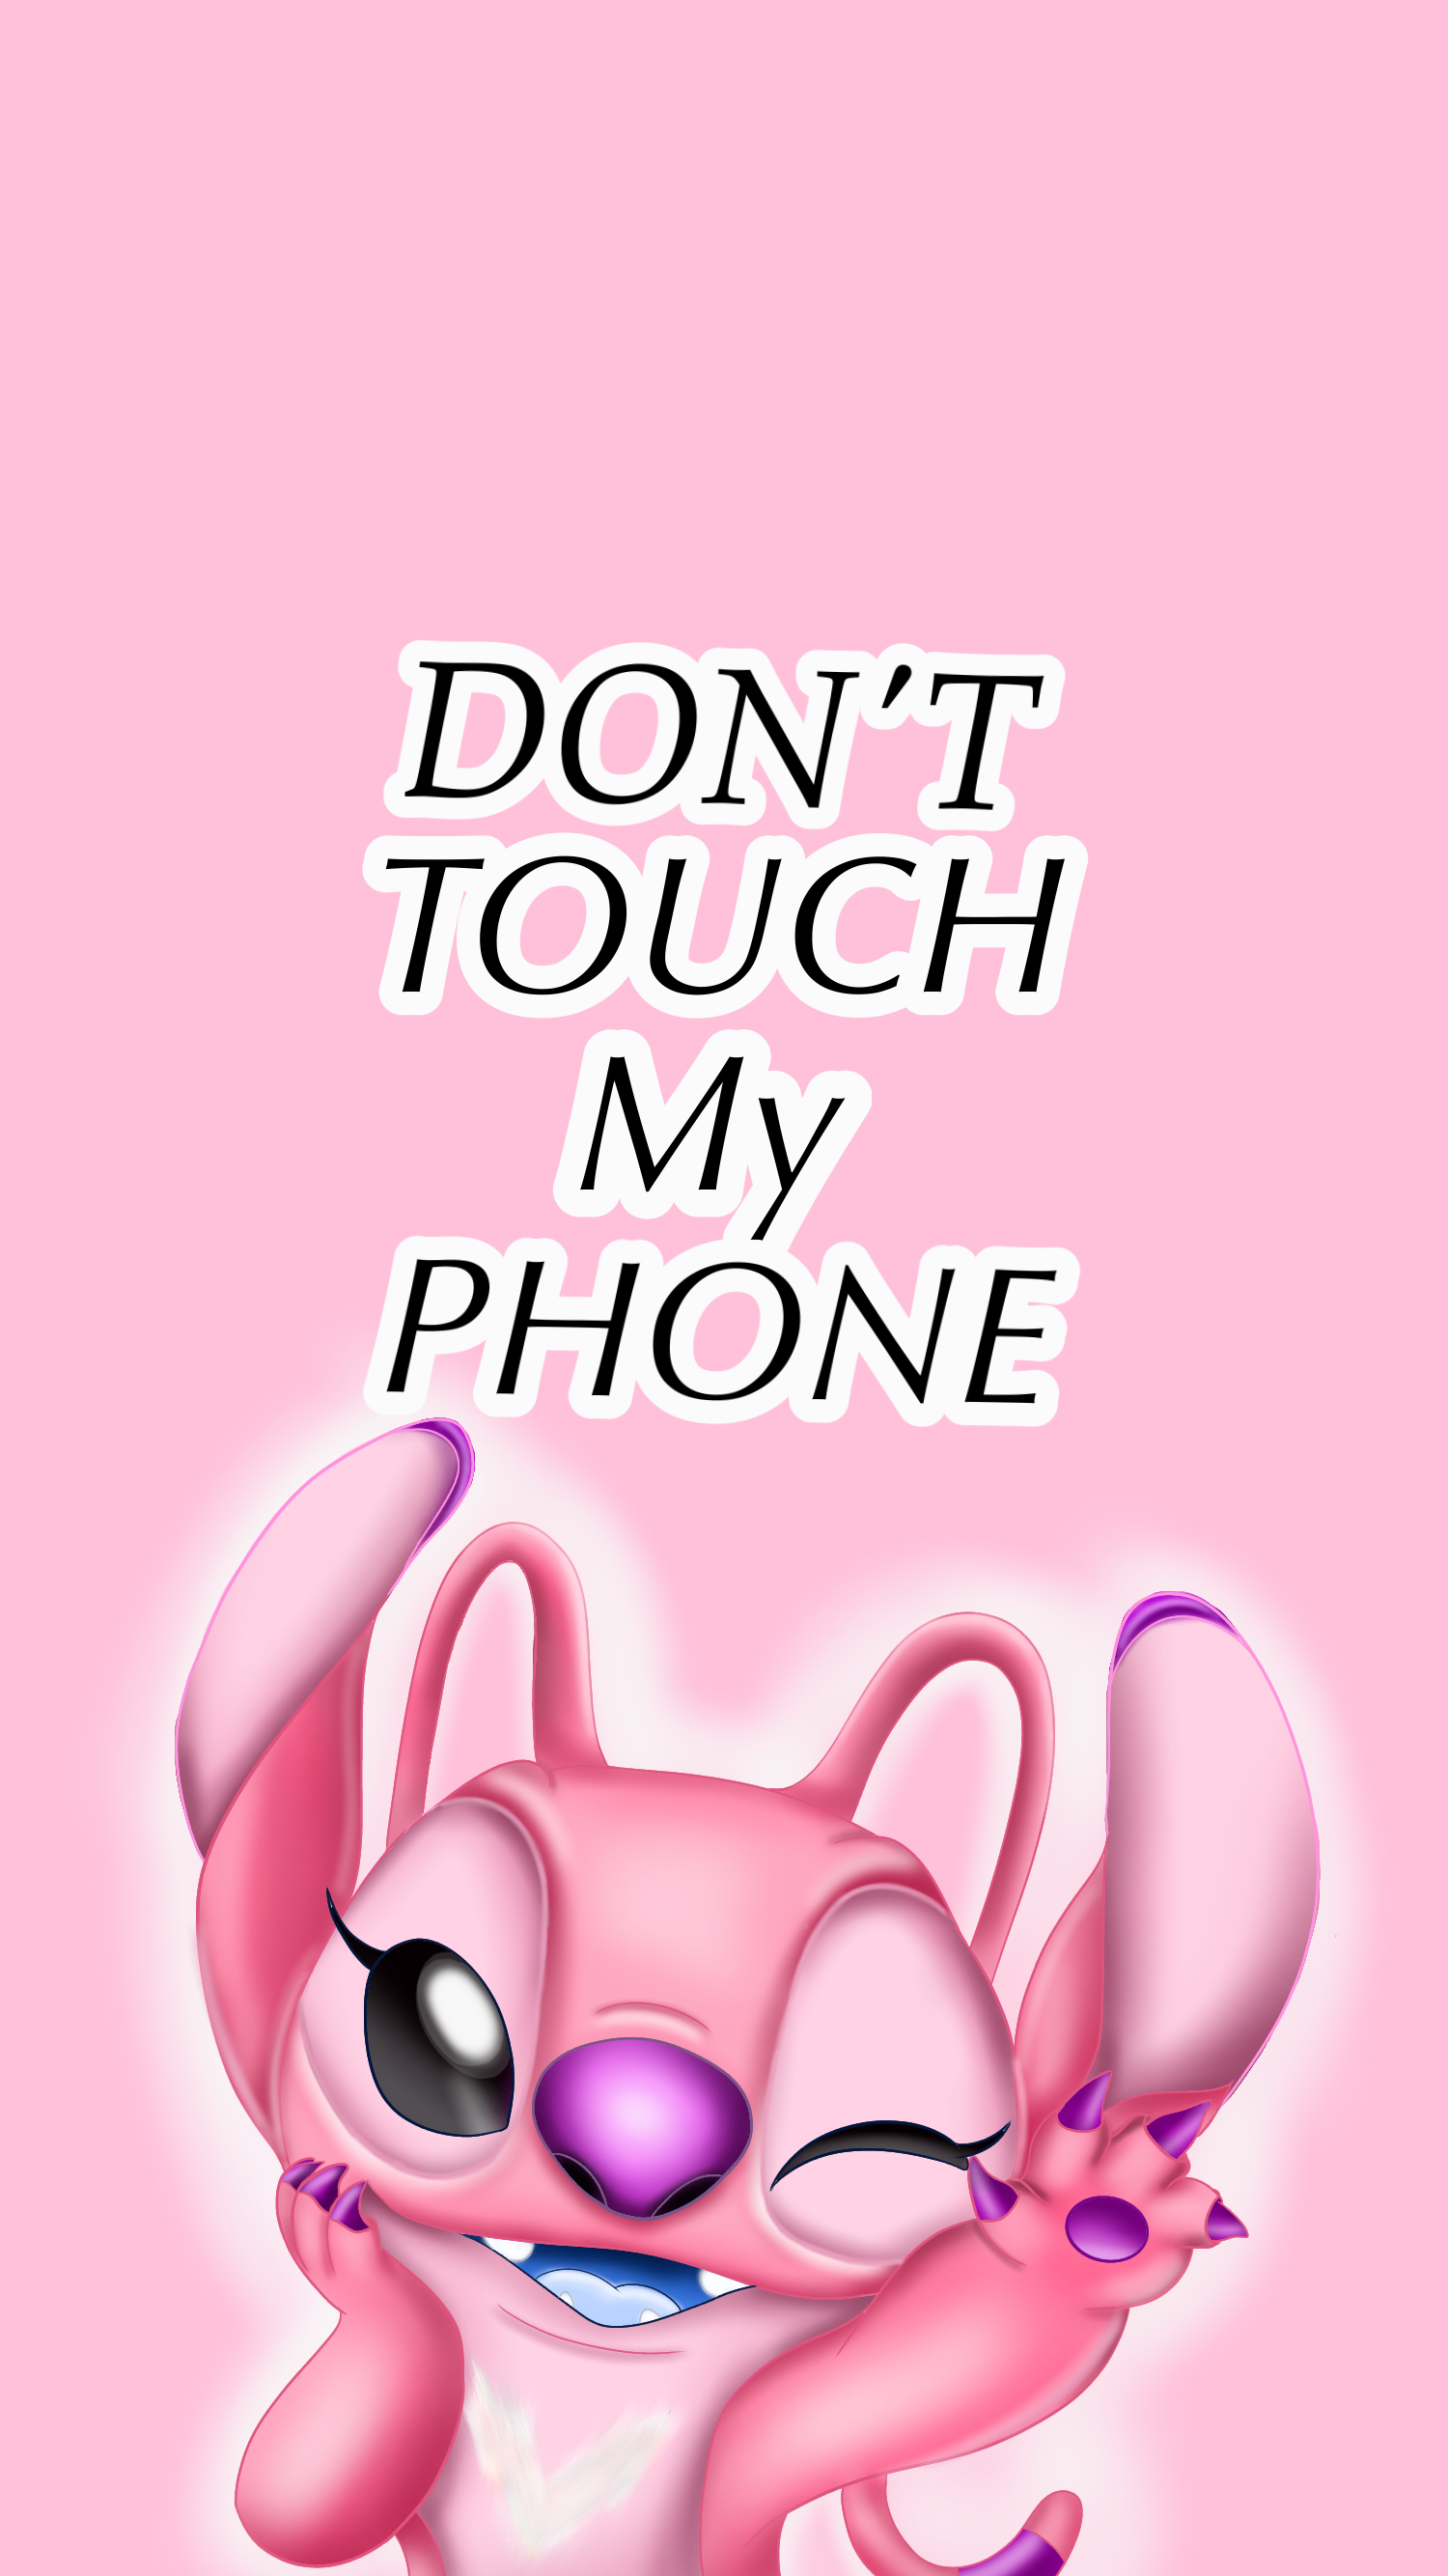 20+] Don't Touch My iPad Stitch Wallpapers - WallpaperSafari